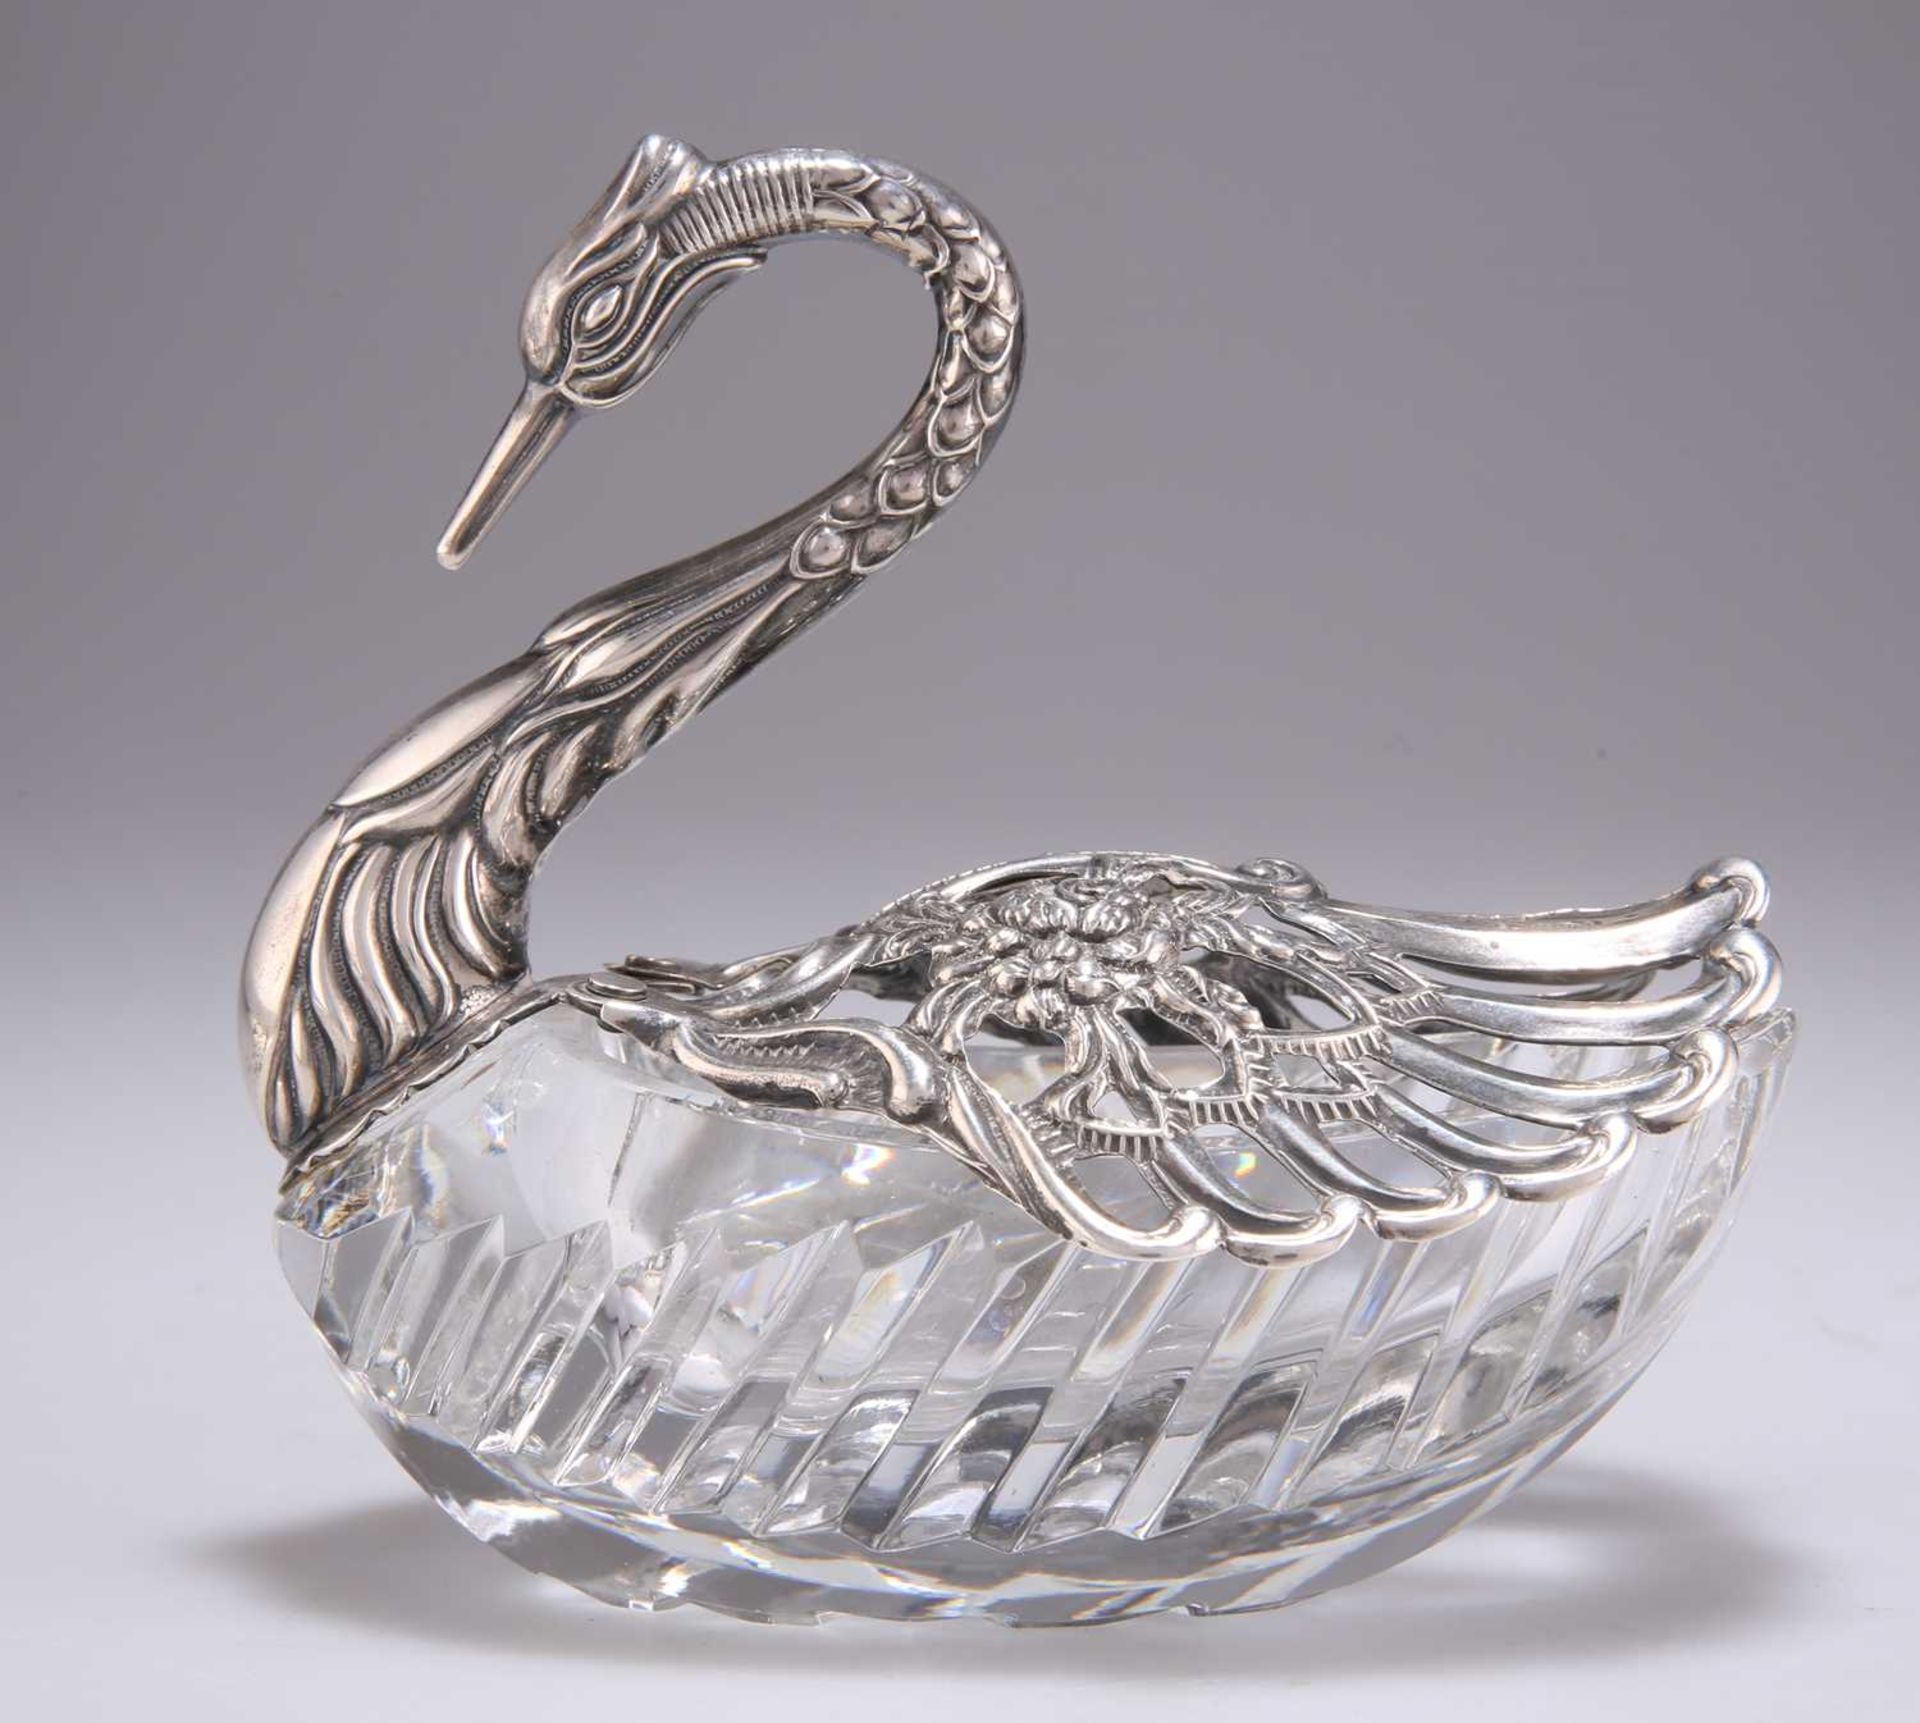 A CONTINENTAL SILVER-MOUNTED GLASS SWAN DISH